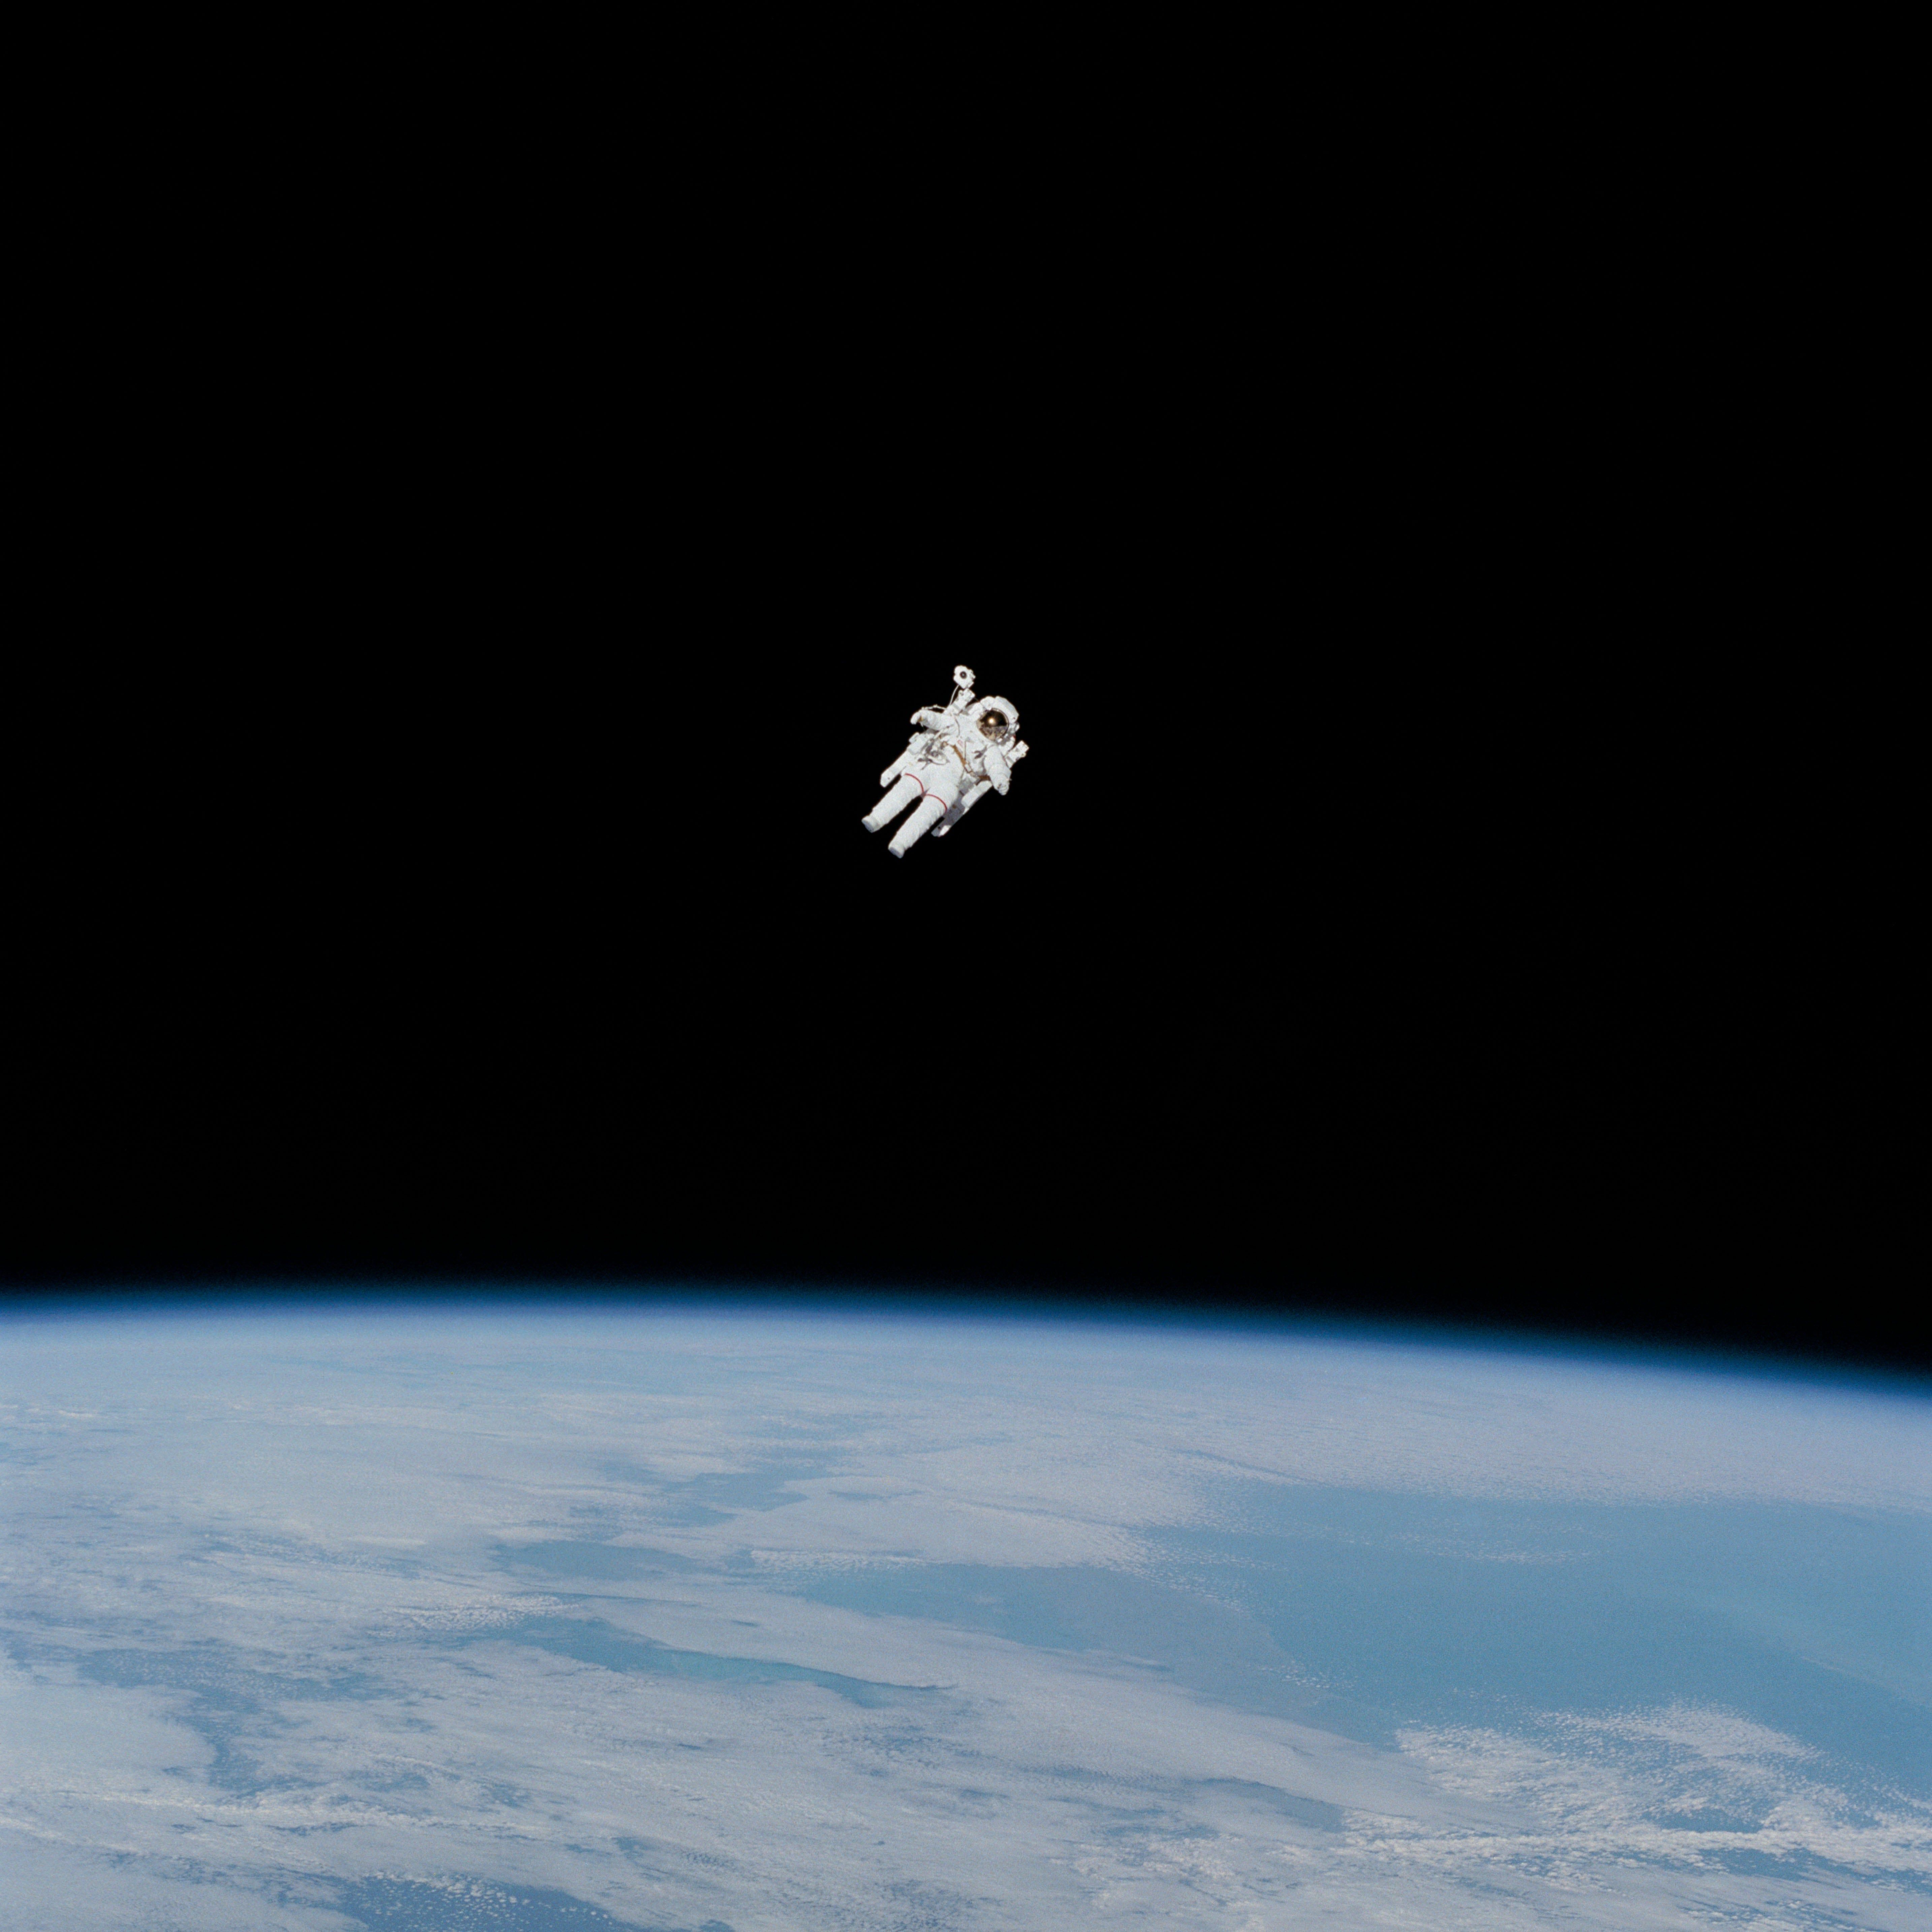 Spacesuit 4K wallpaper for your desktop or mobile screen free and easy to download